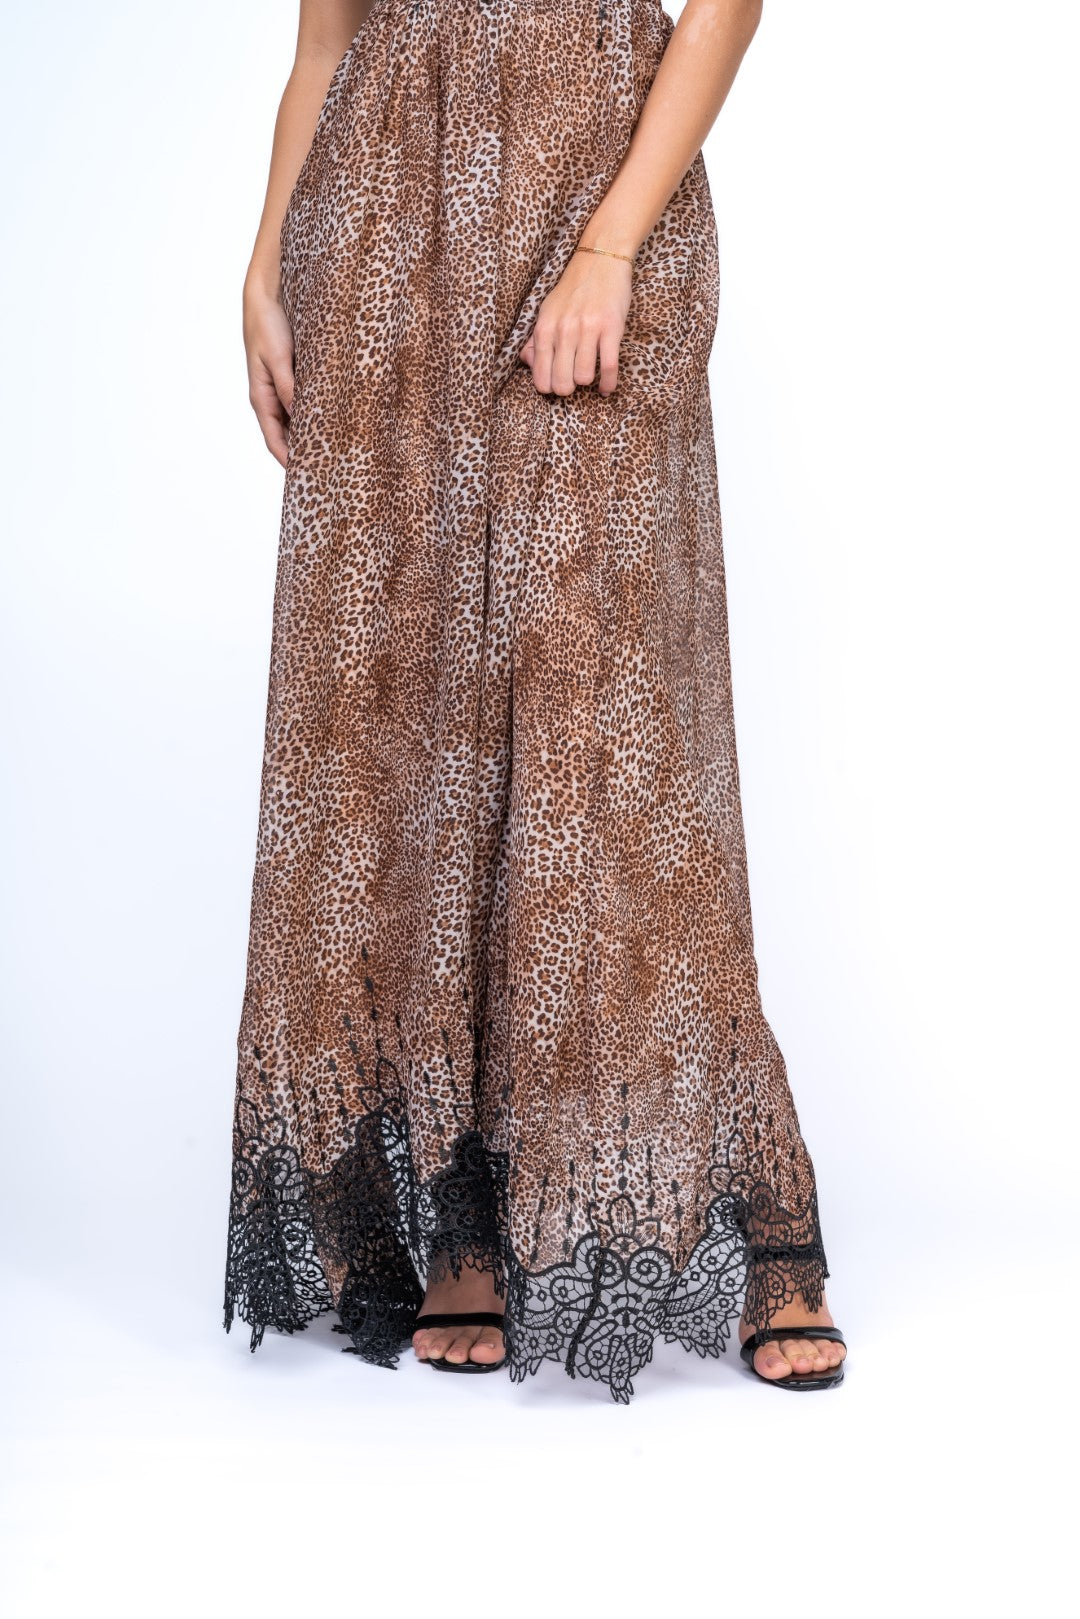 Leopoard Maxi Dress with Frontal Cut Out and Lace Trimming